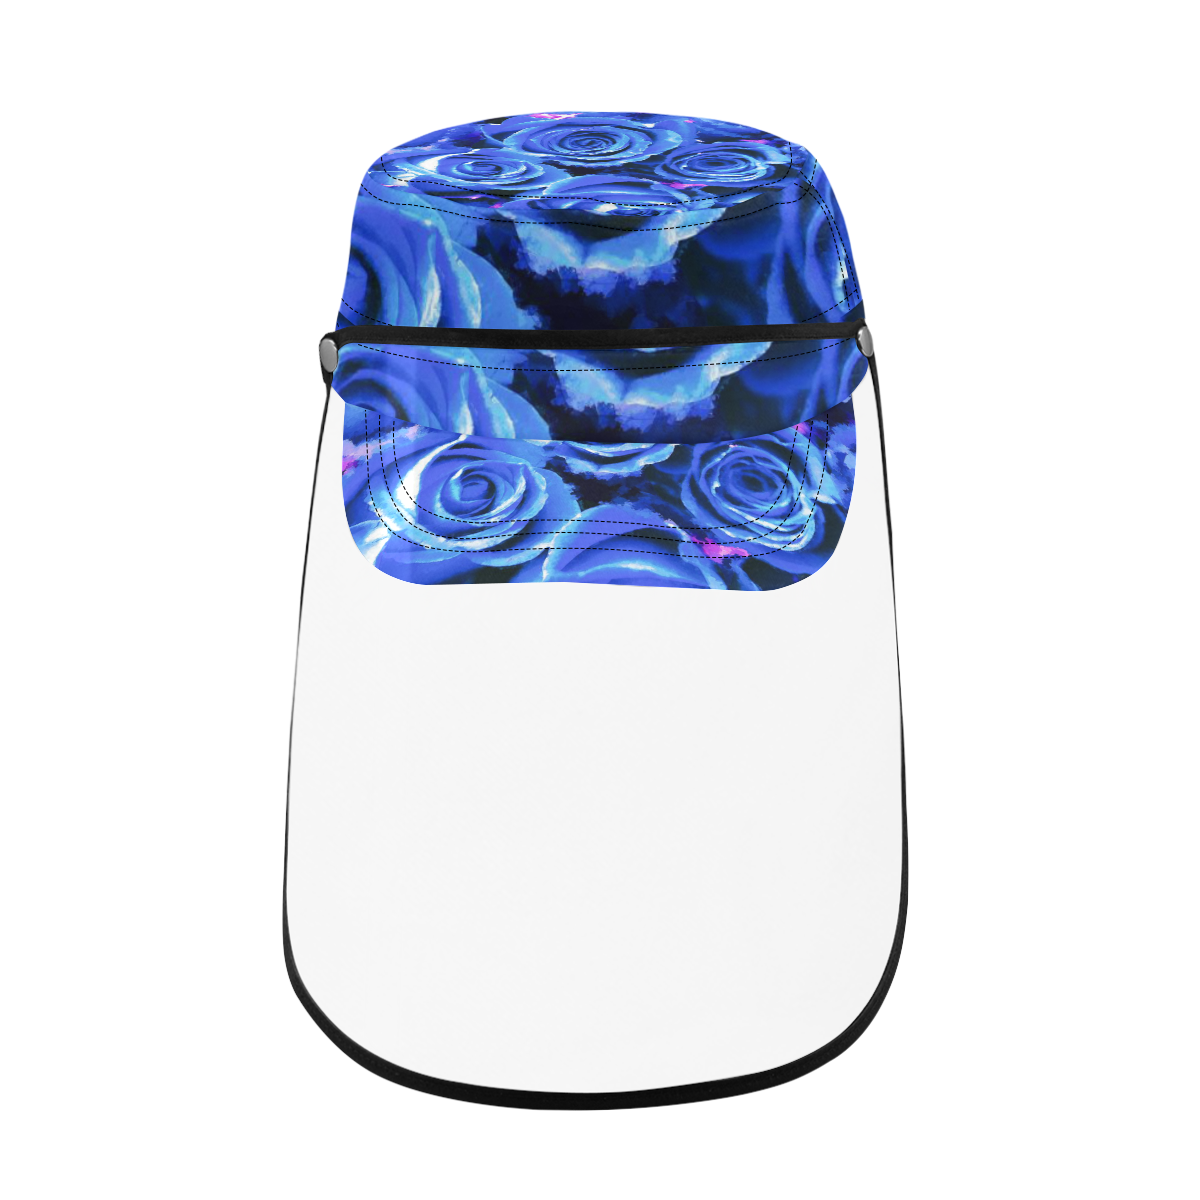 roses are blue Military Style Cap (Detachable Face Shield)